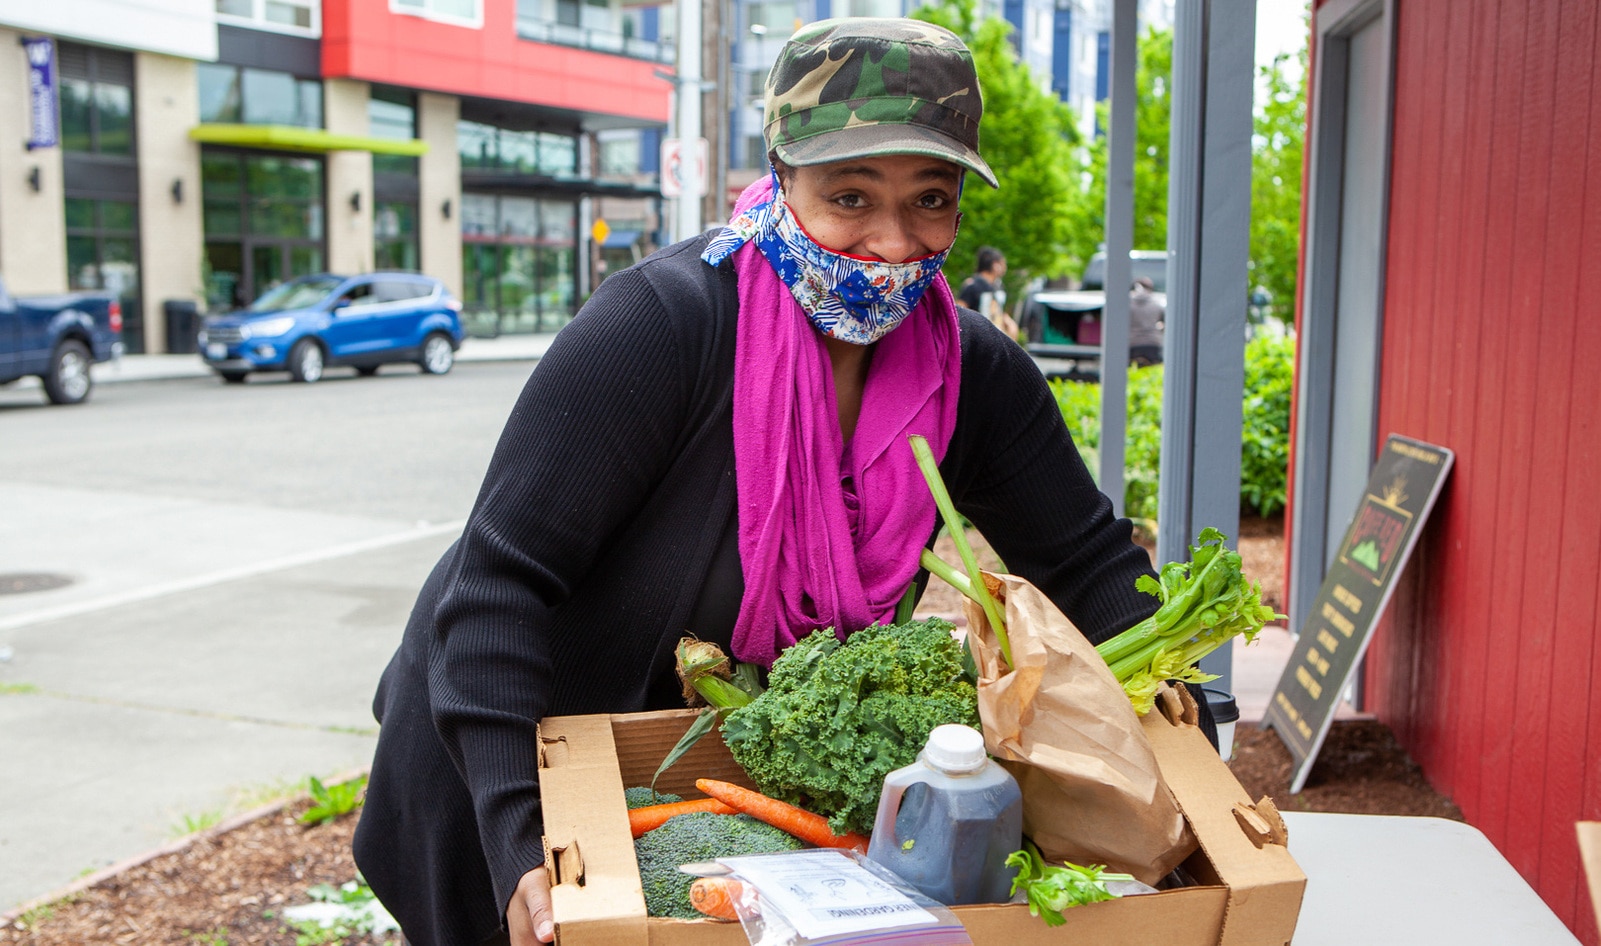 New Vegan CSA Hands Out 10,000 Pounds of Food to 2,500 Underprivileged People in Seattle During COVID-19